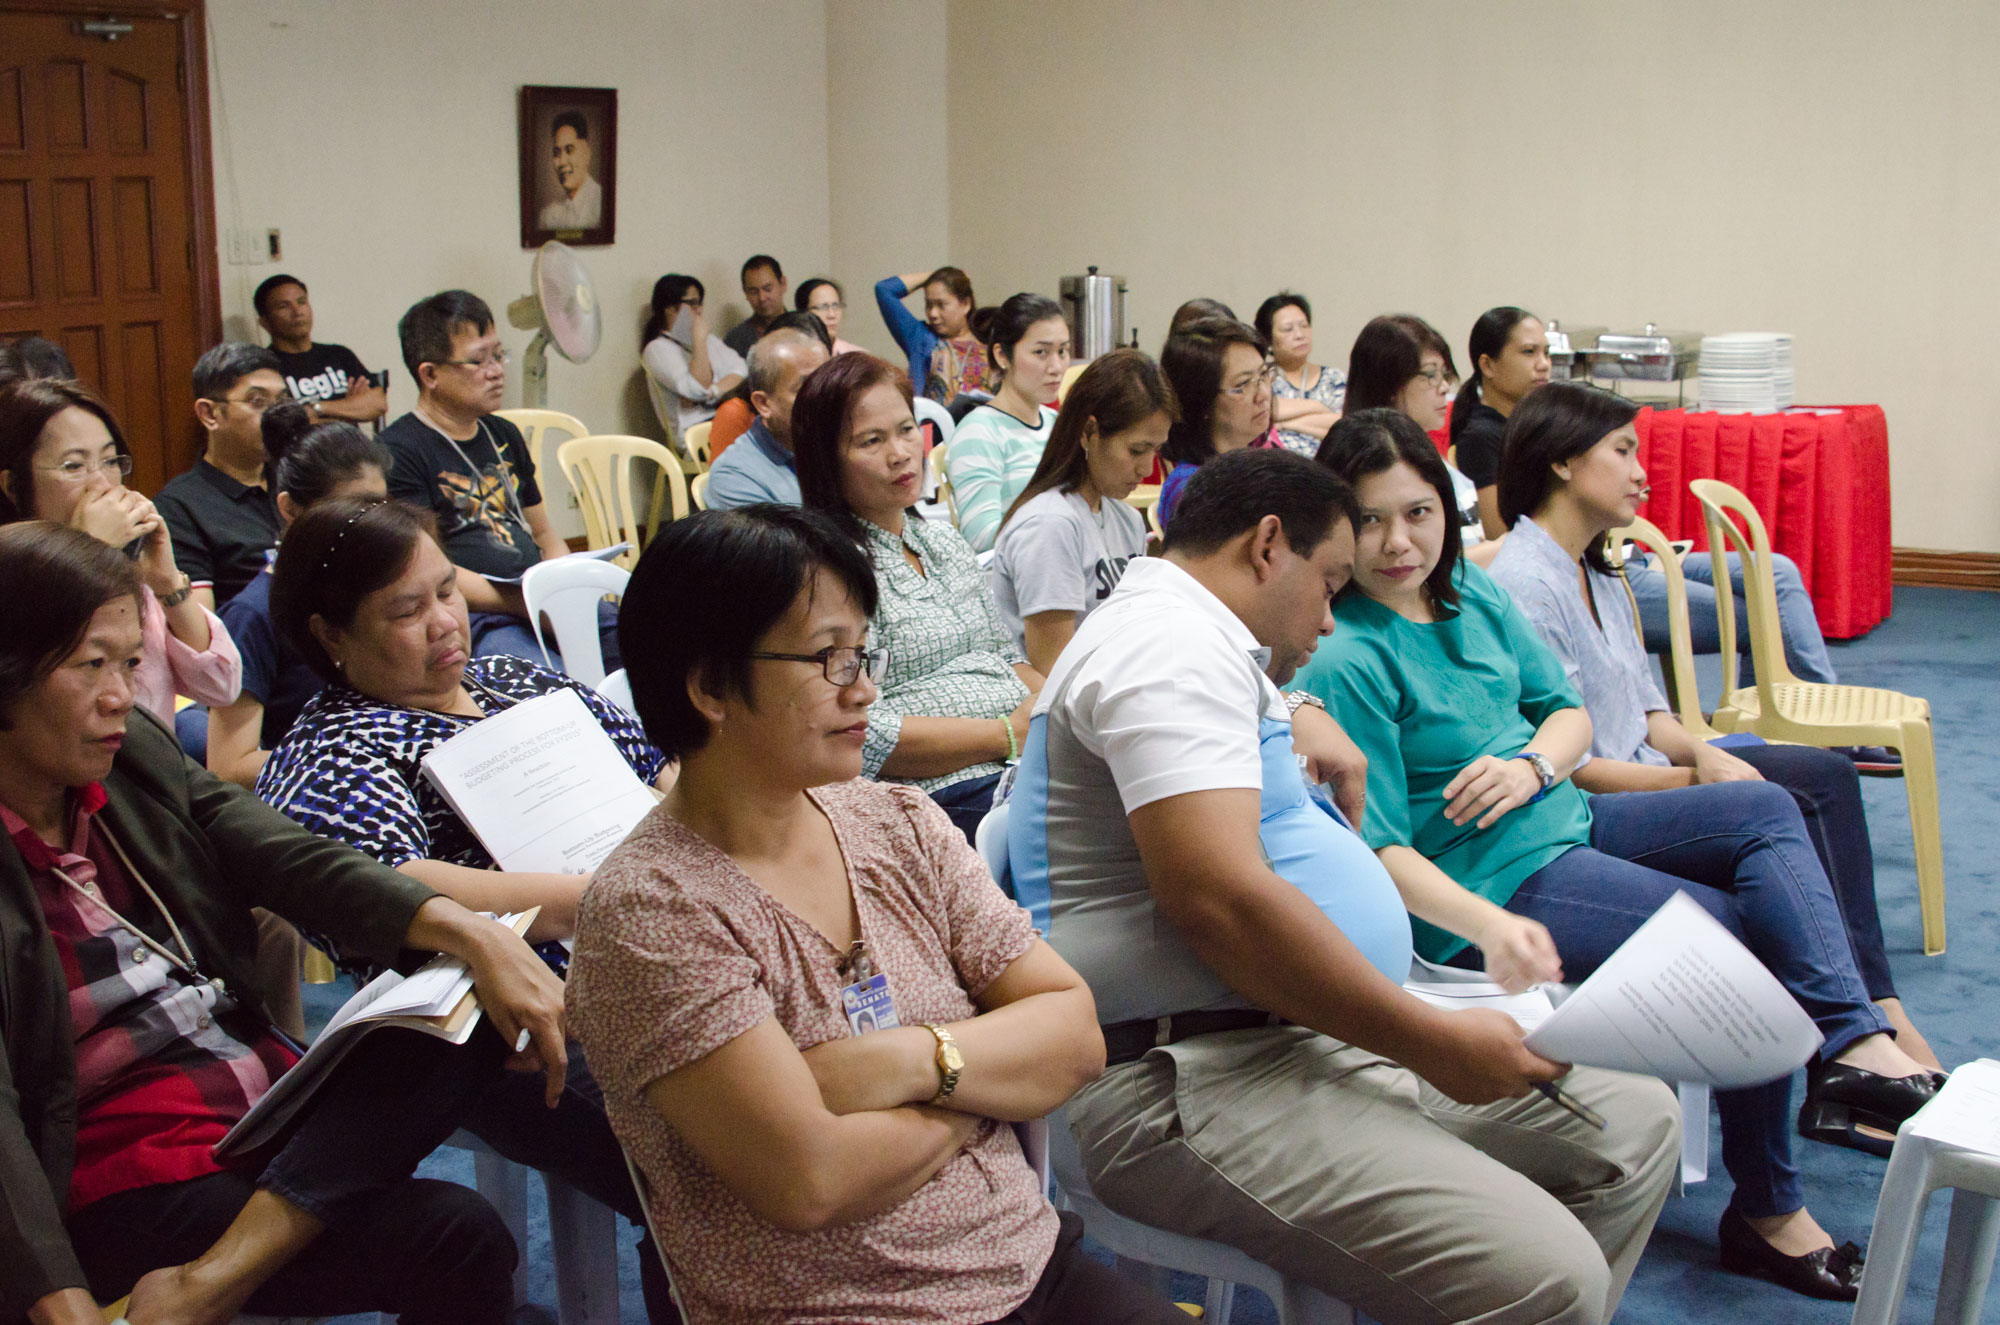 Senate Centennial Lecture Series “Assessment of the Bottom-up Budgeting Process for FY 2015-ggm_7975.jpg